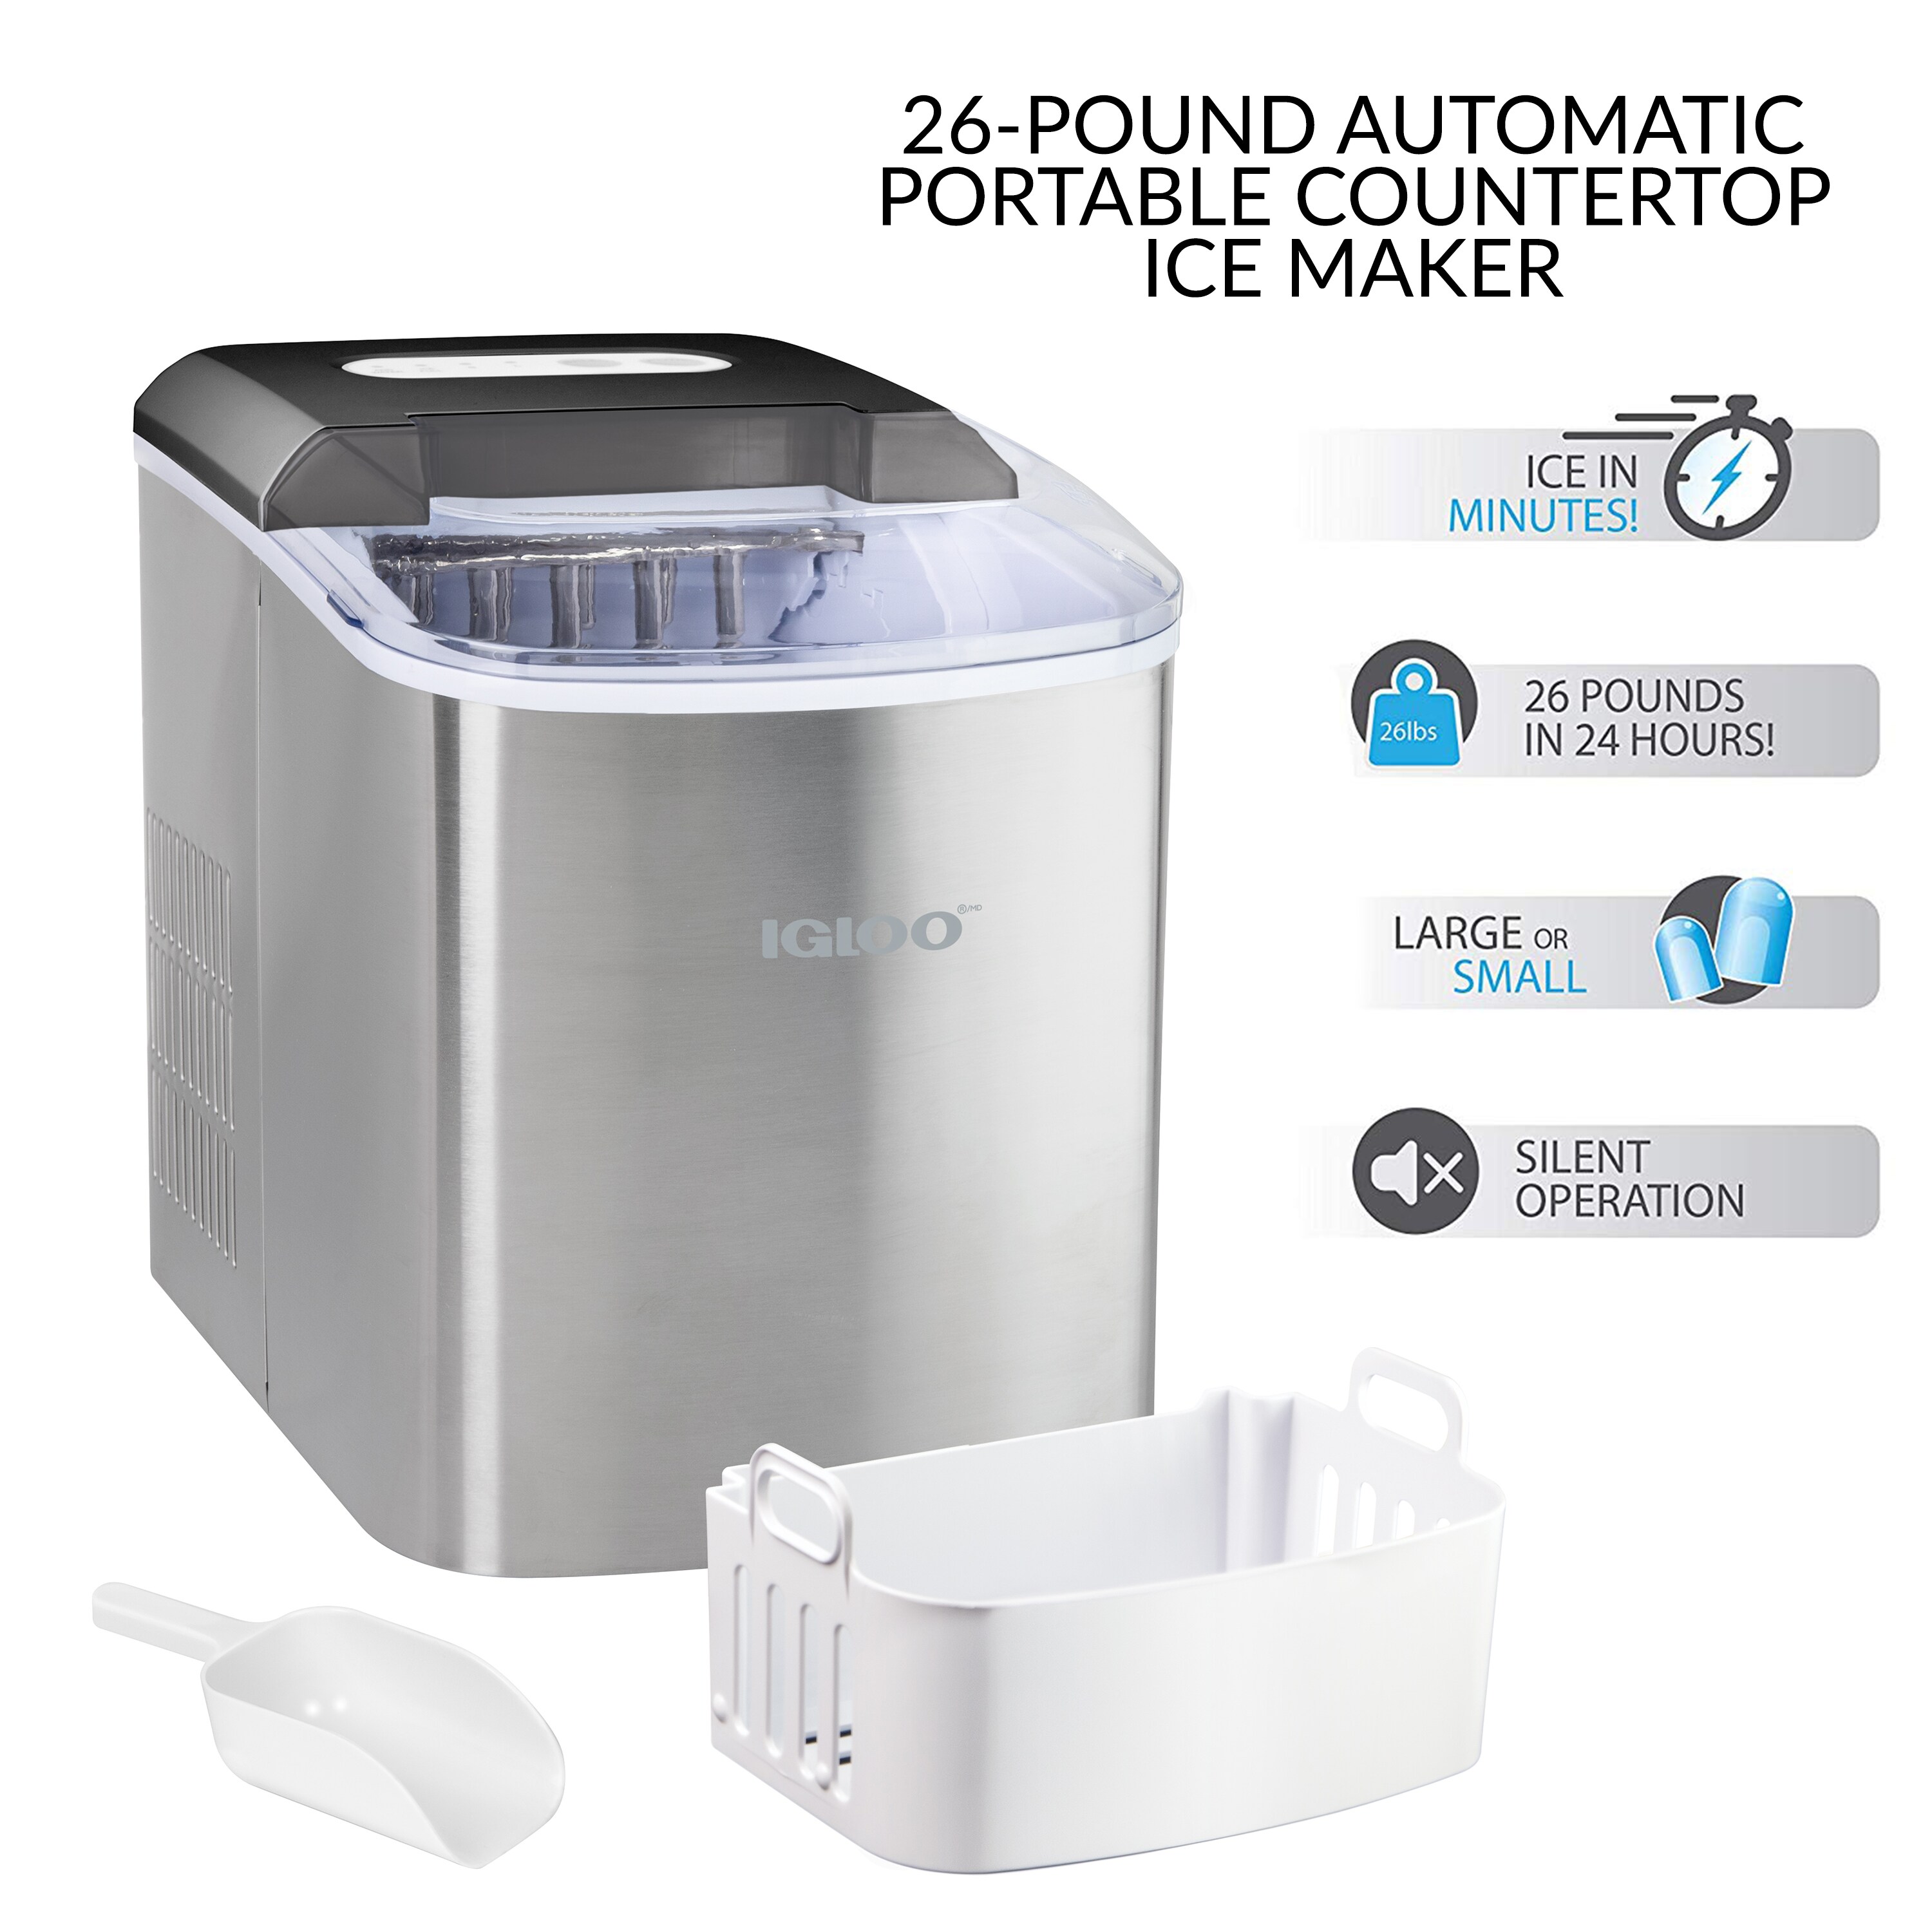 Igloo 26lb Auto Self-Cleaning Portable Countertop Ice Maker